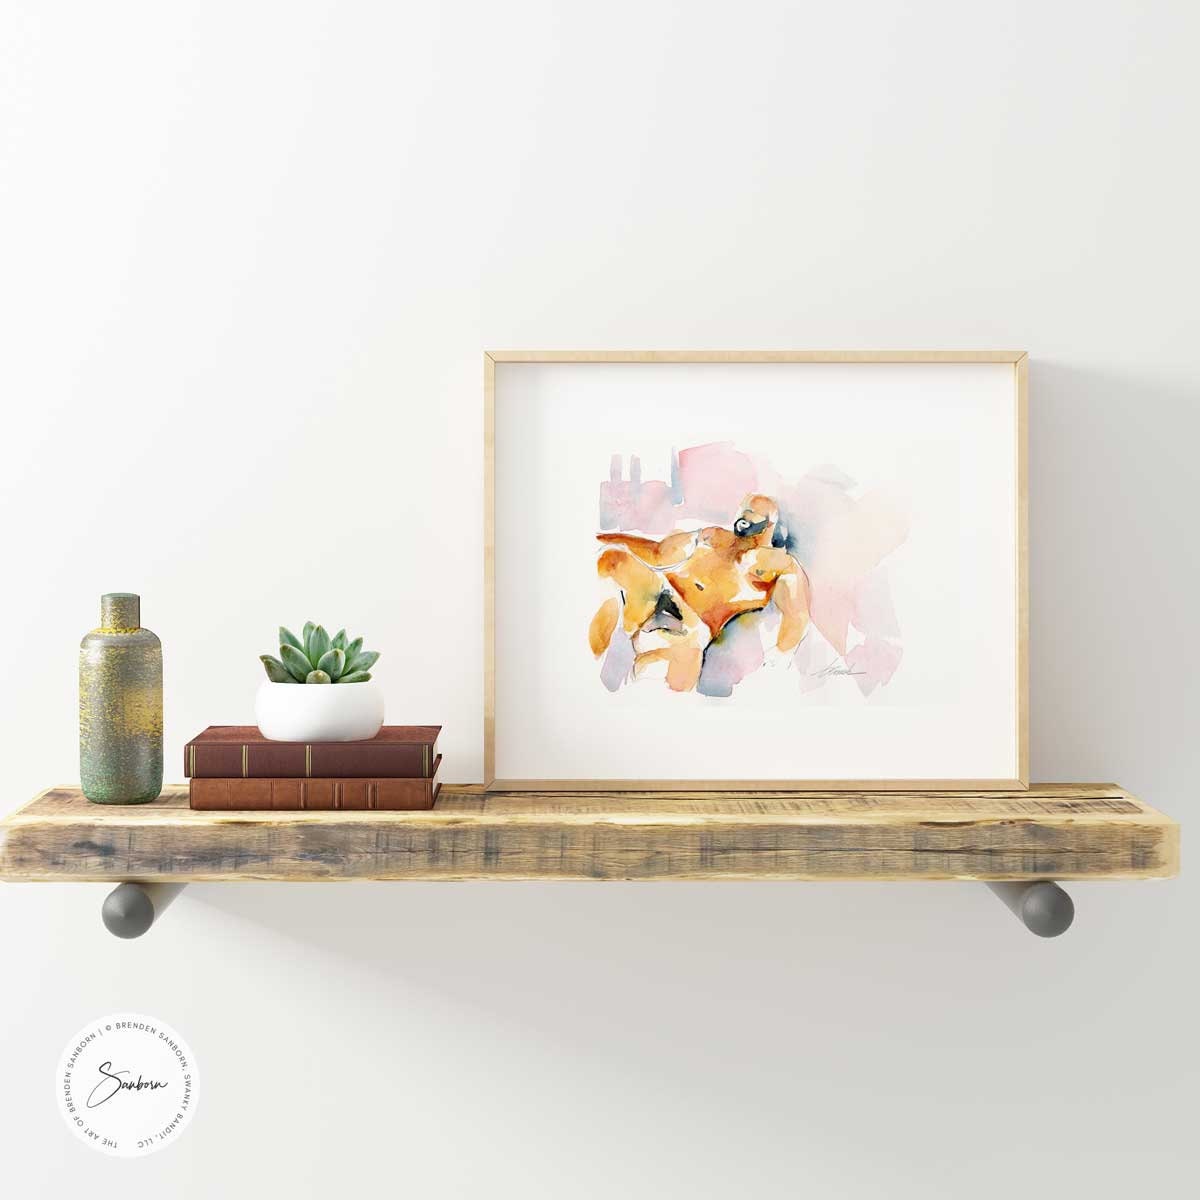 Handsome Furry Bear in Bed - Original Watercolor Painting